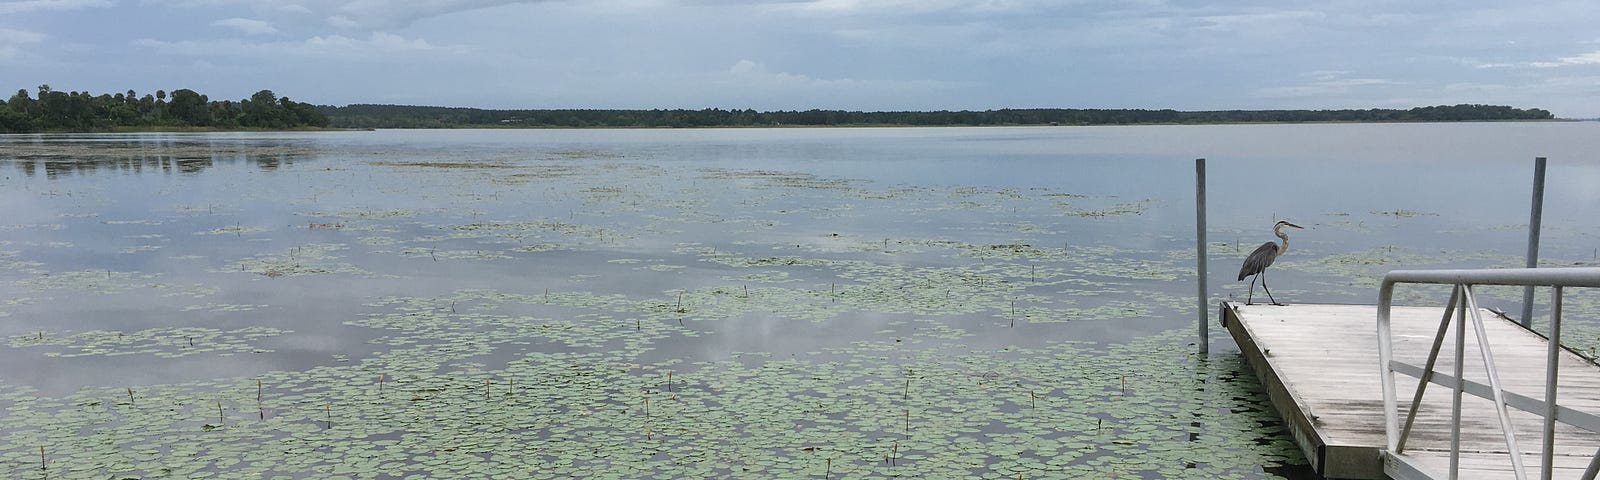 A swamp lake covered in lilypads in Florida. A blue heron sits on the dock.